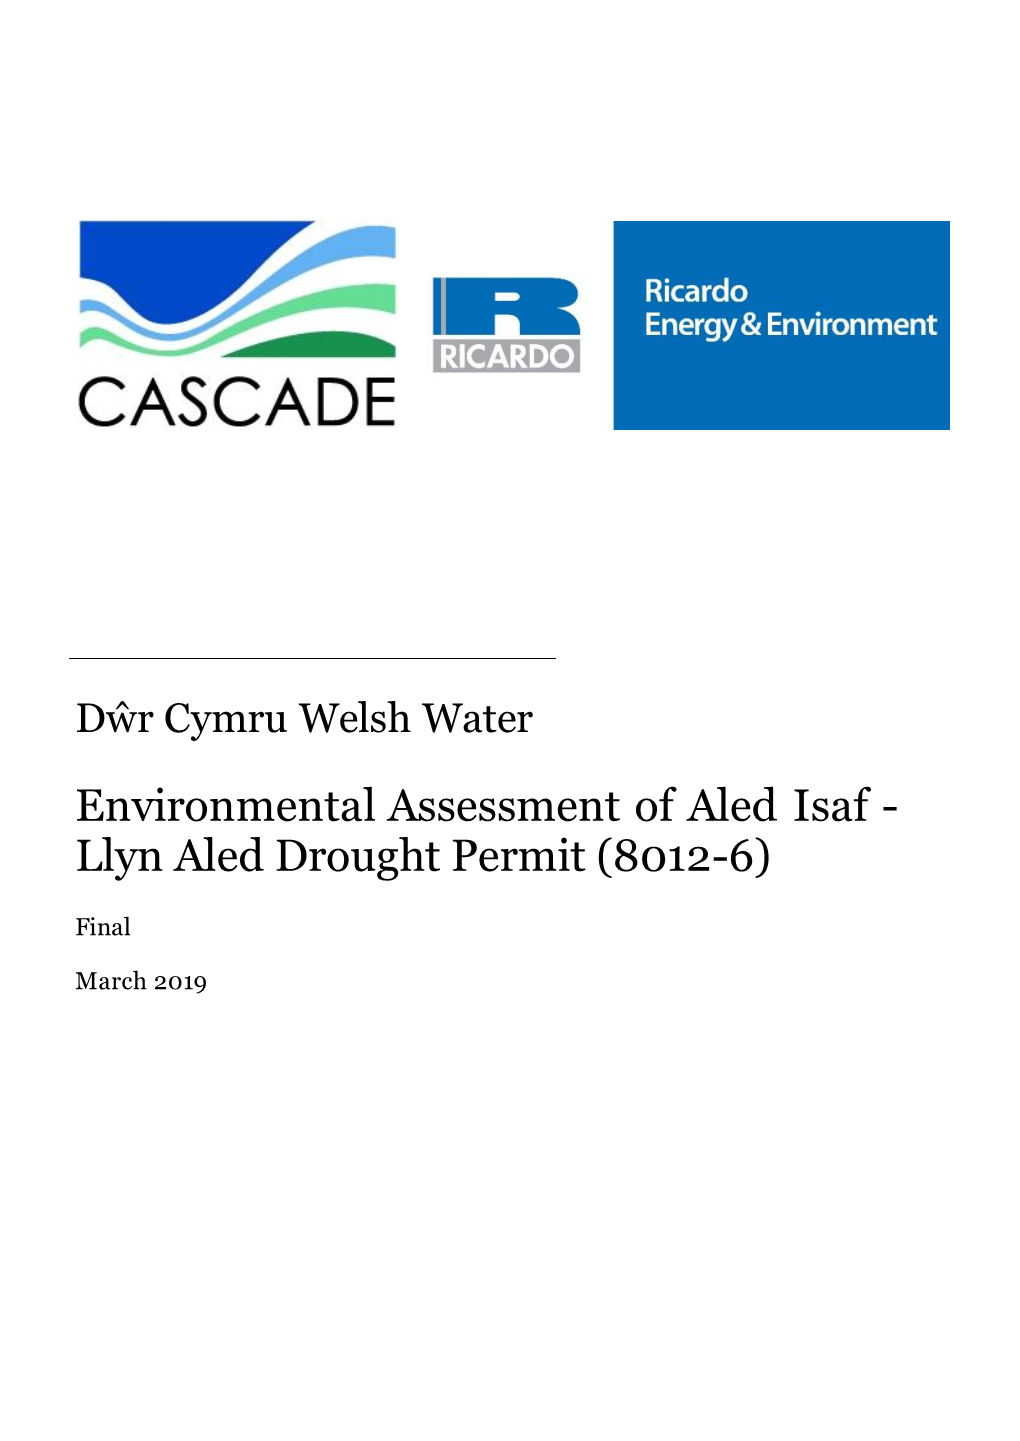 Environmental Assessment of Aled Isaf - Llyn Aled Drought Permit (8012-6)